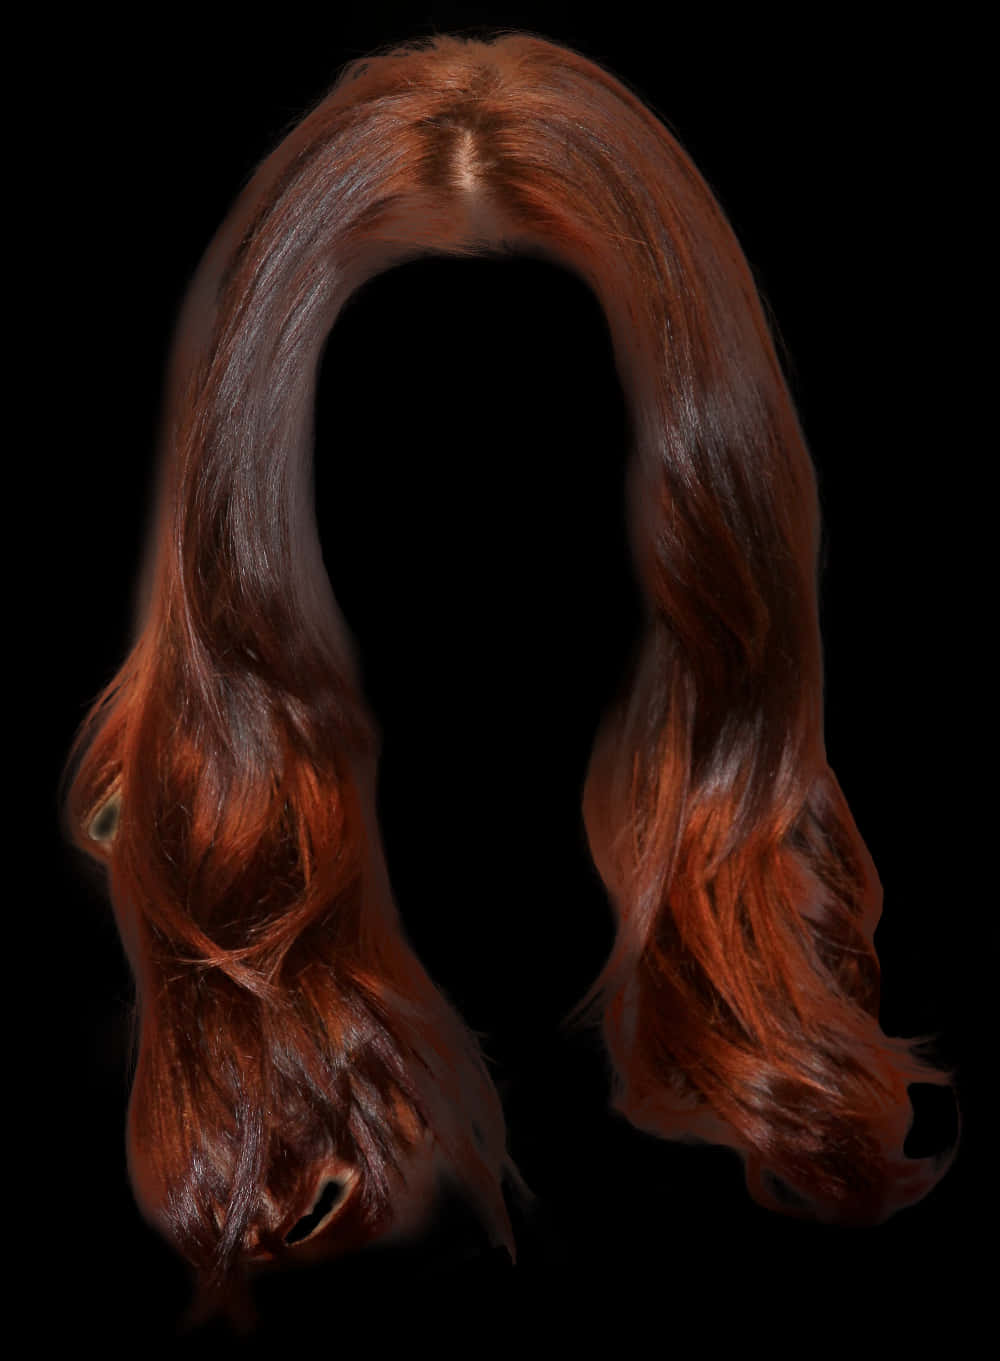 A Woman's Hair With A Black Background